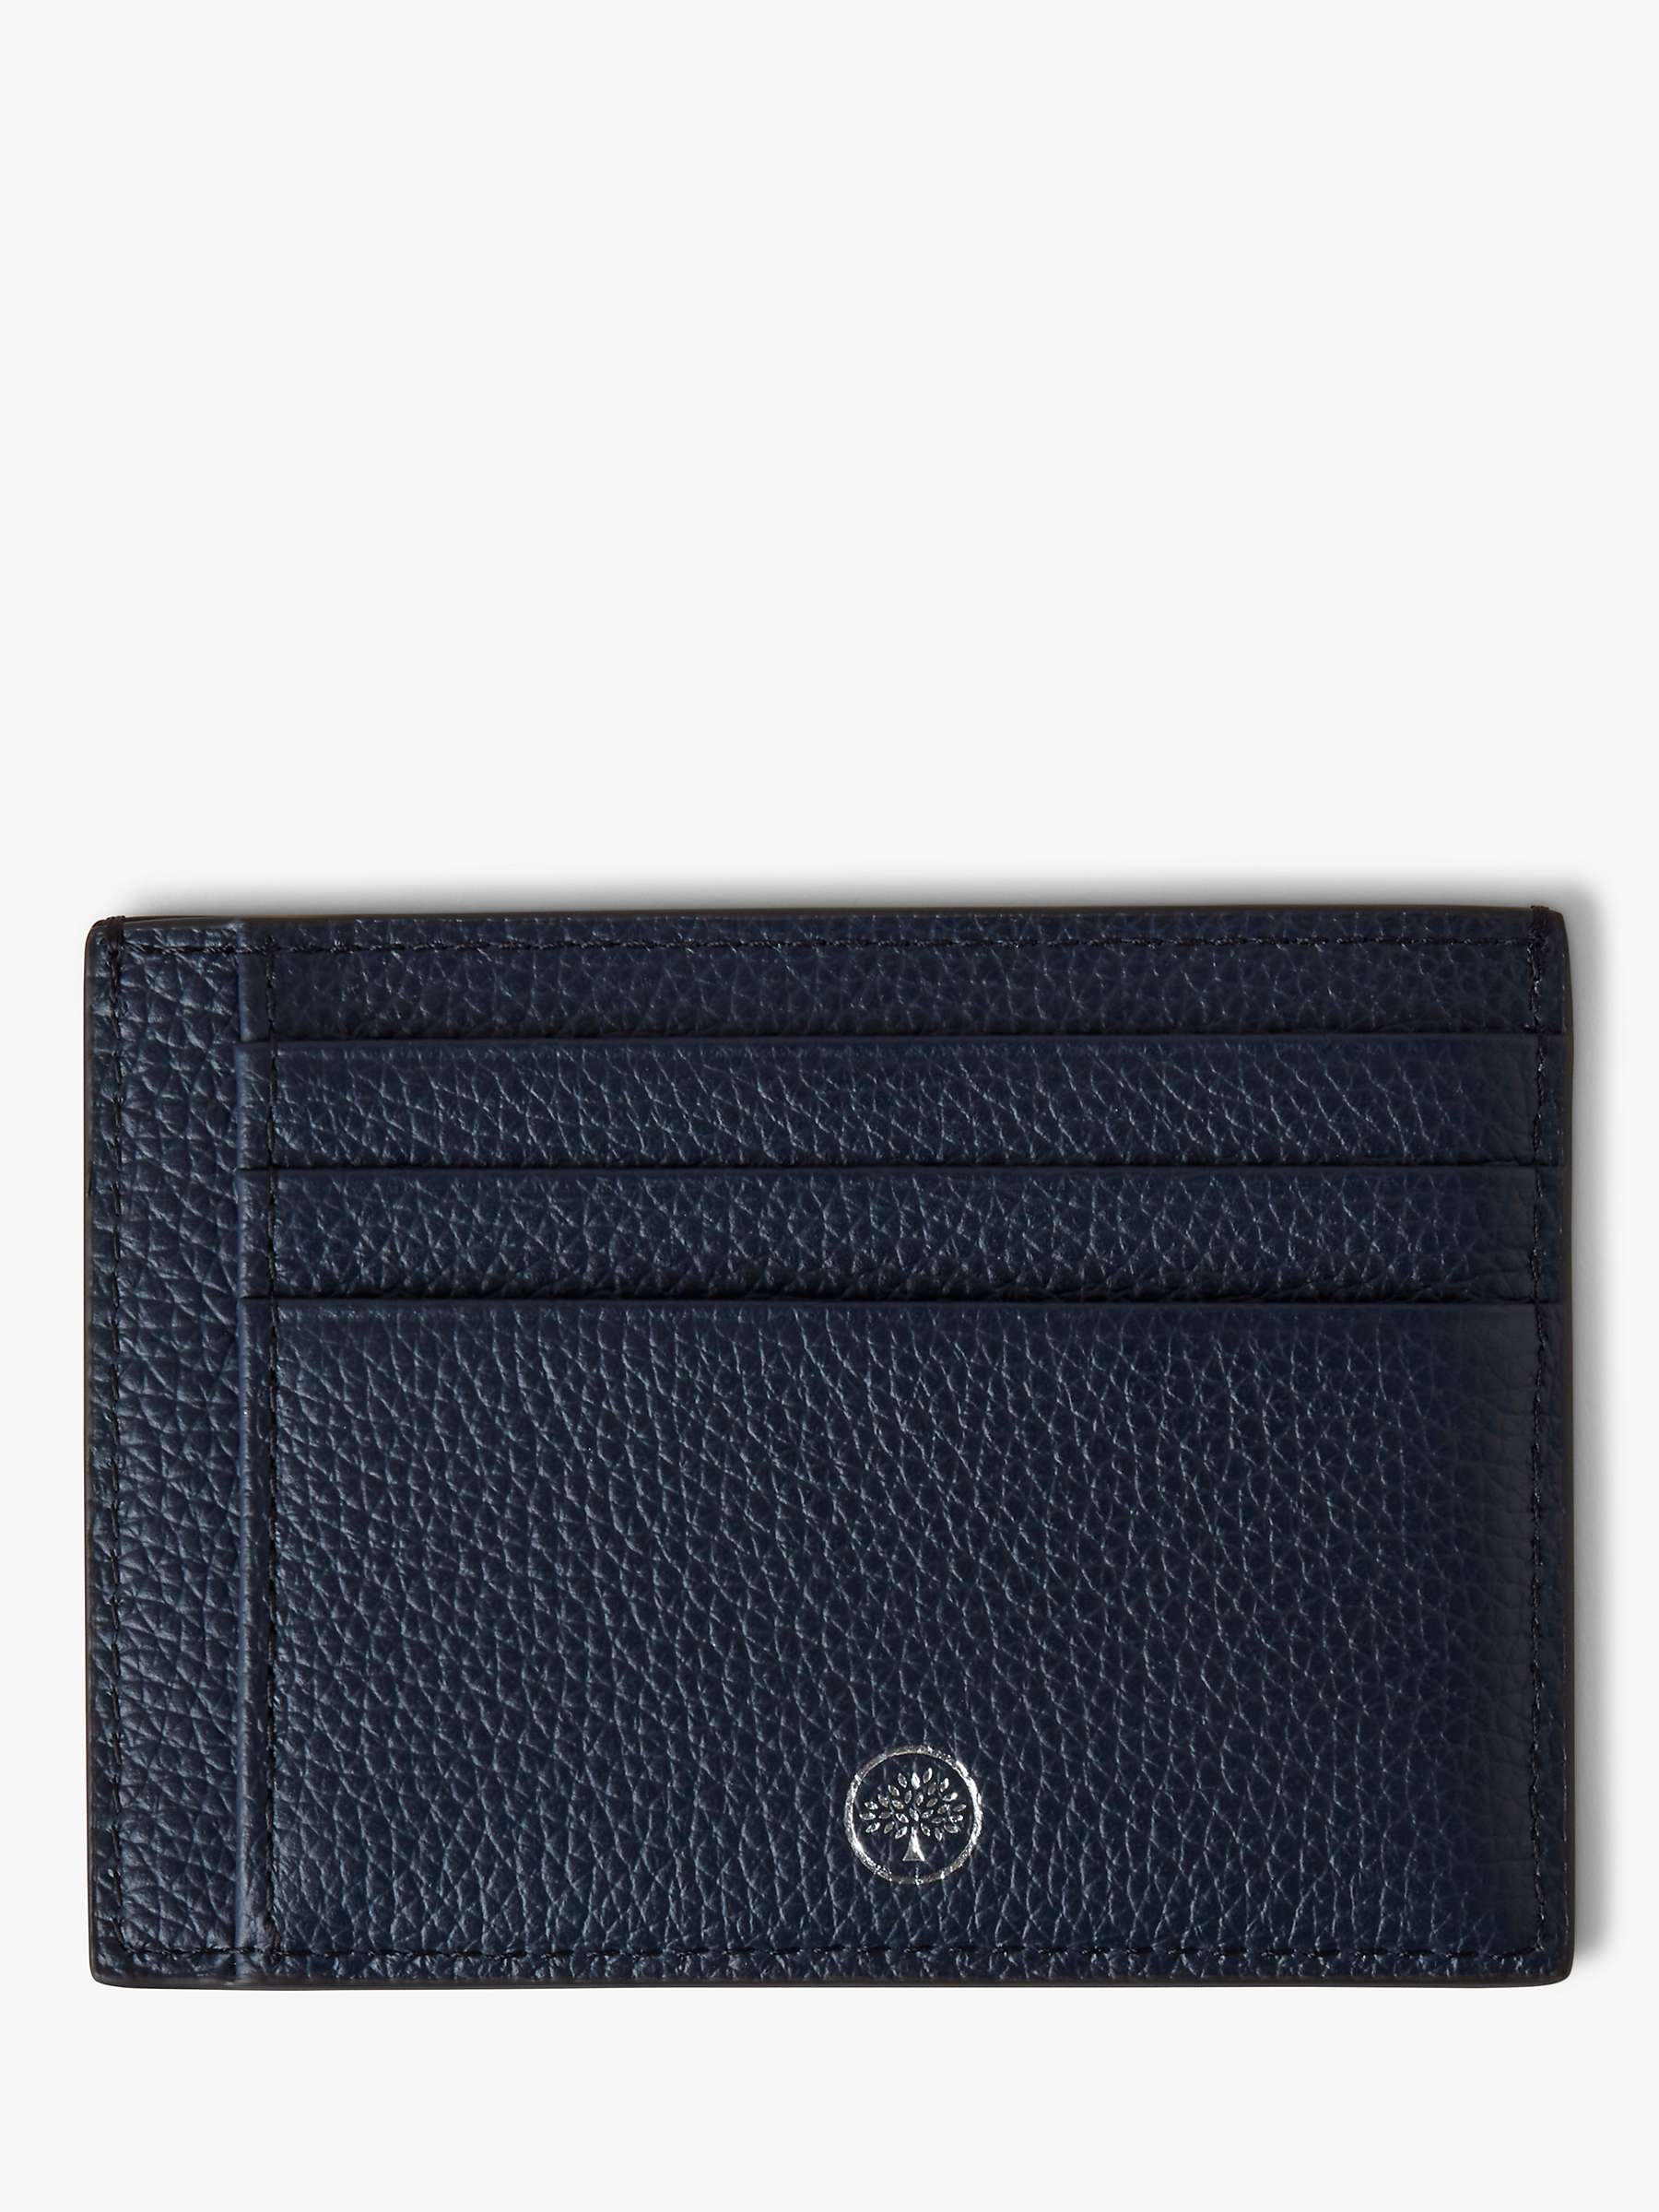 Buy Mulberry Small Classic Grain Leather Card Holder Online at johnlewis.com